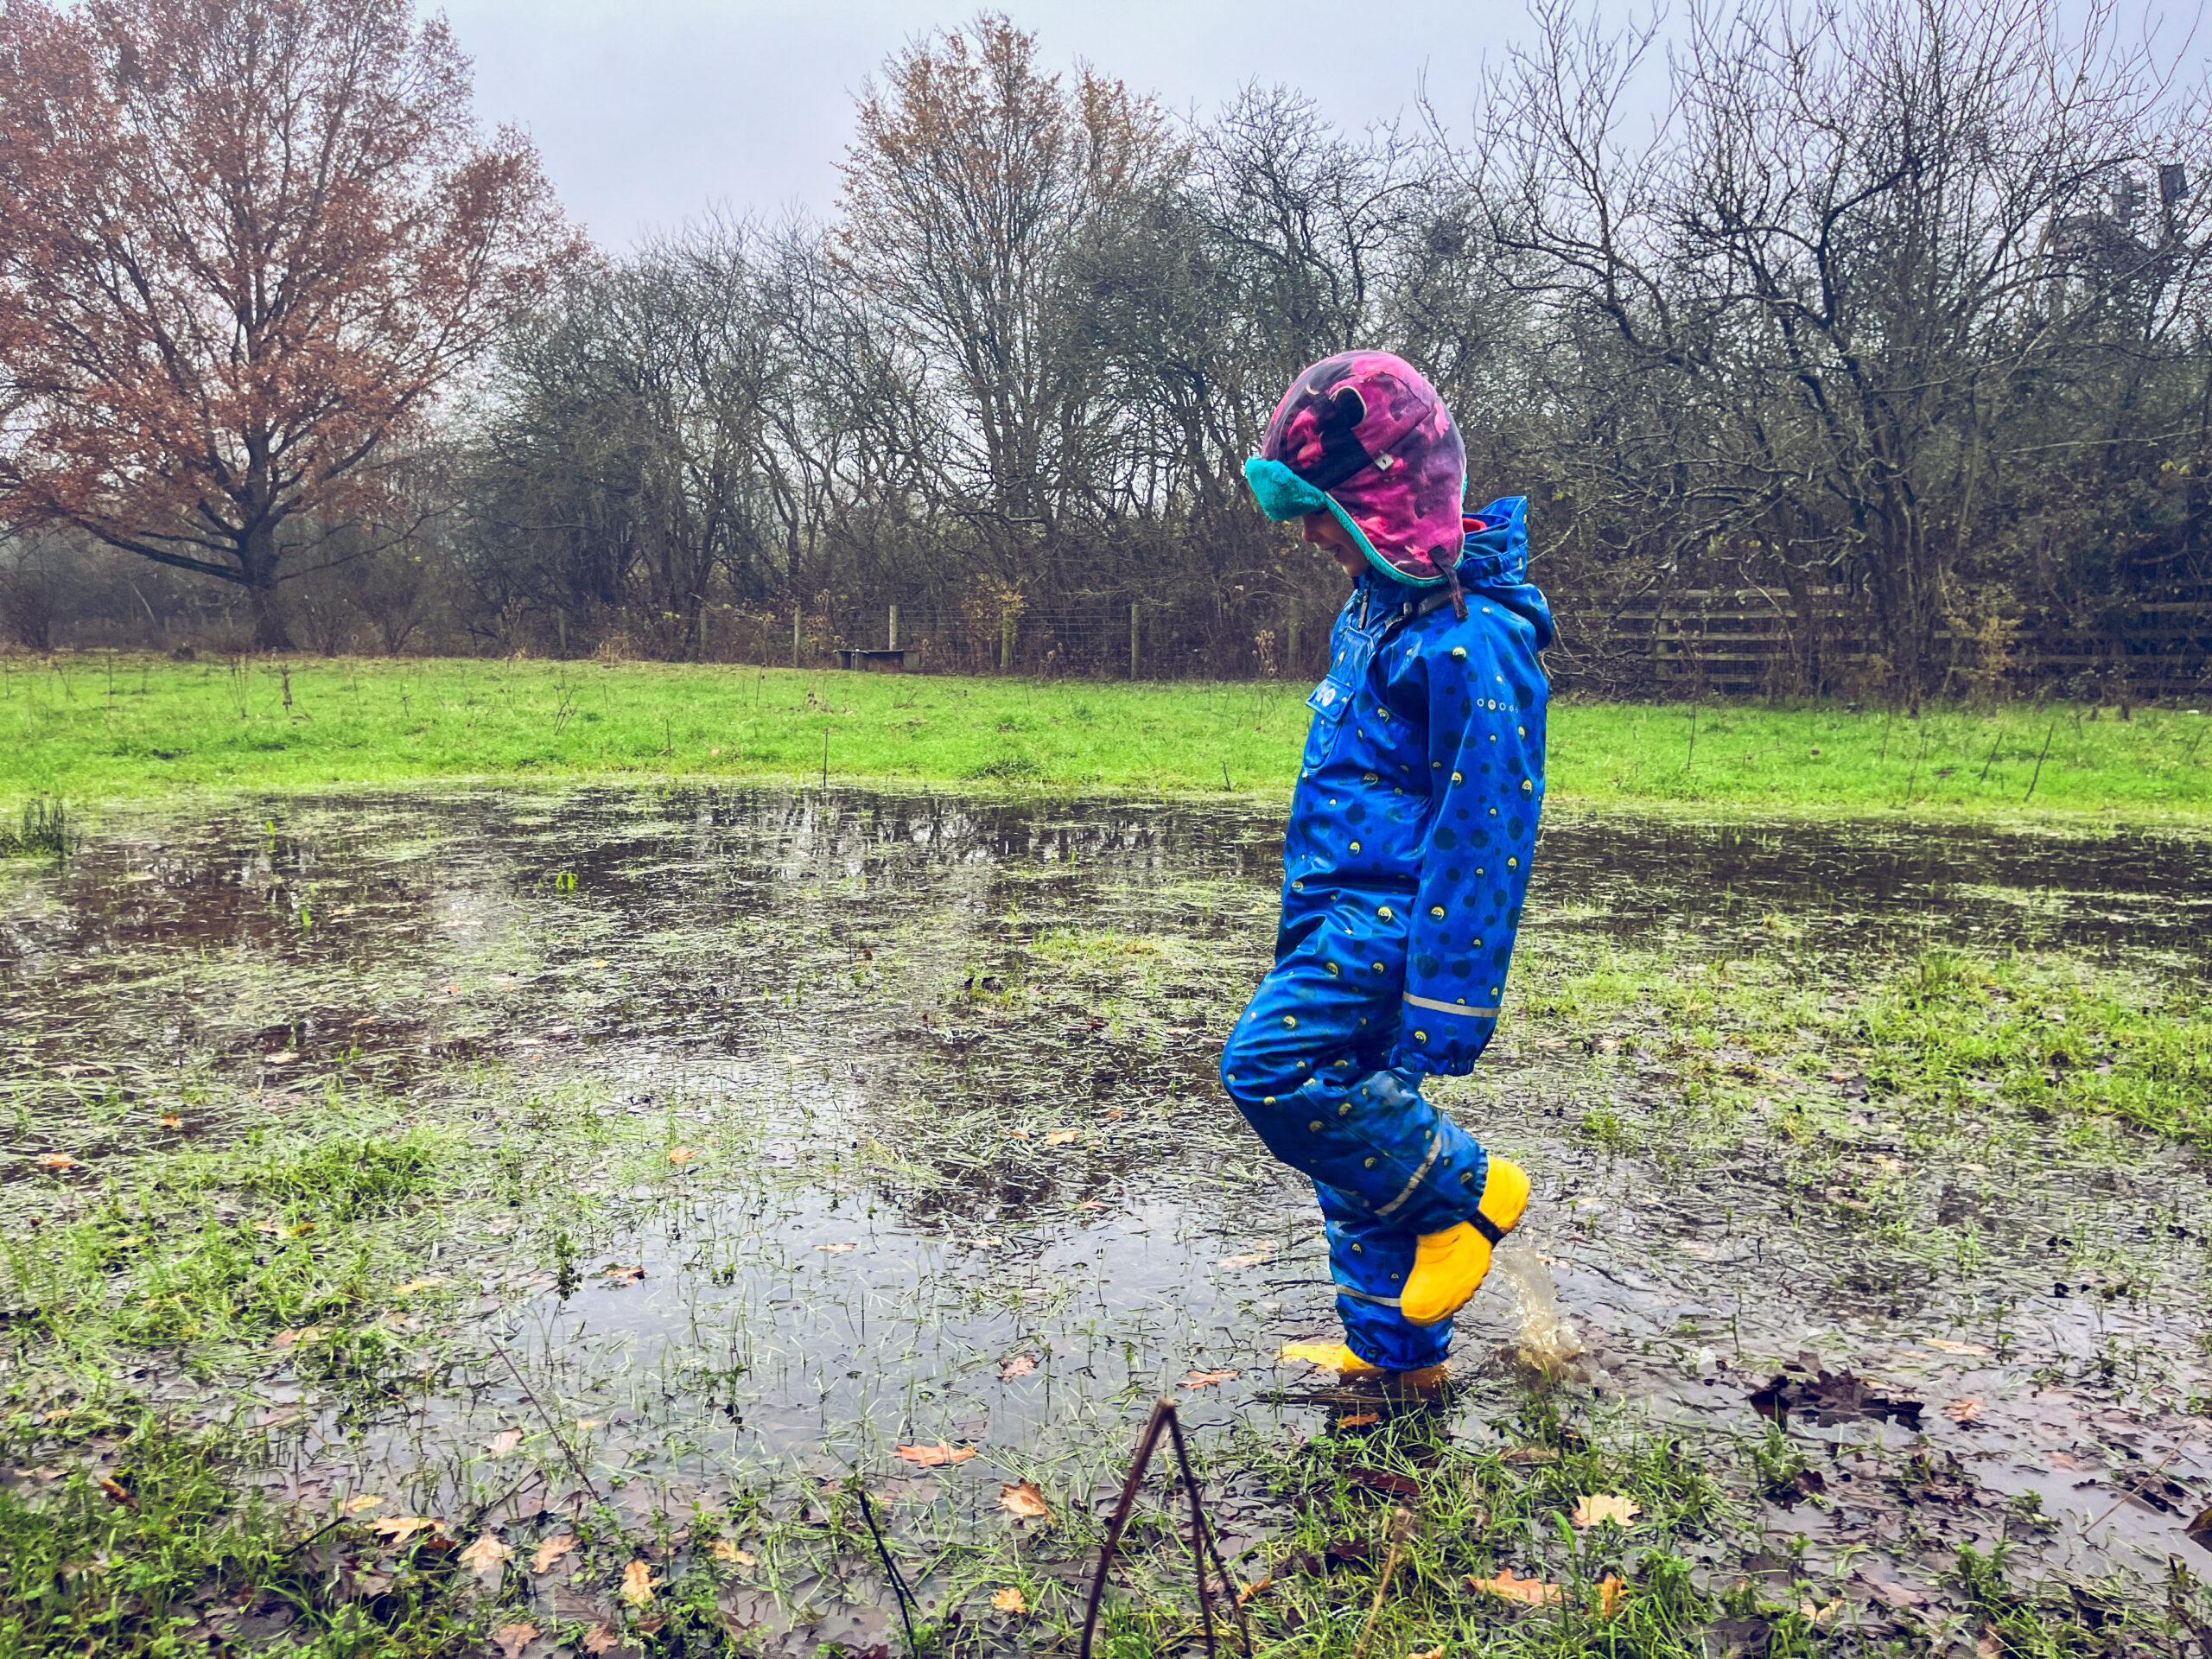 5 ways to make a muddy lunchtime walk special for kids